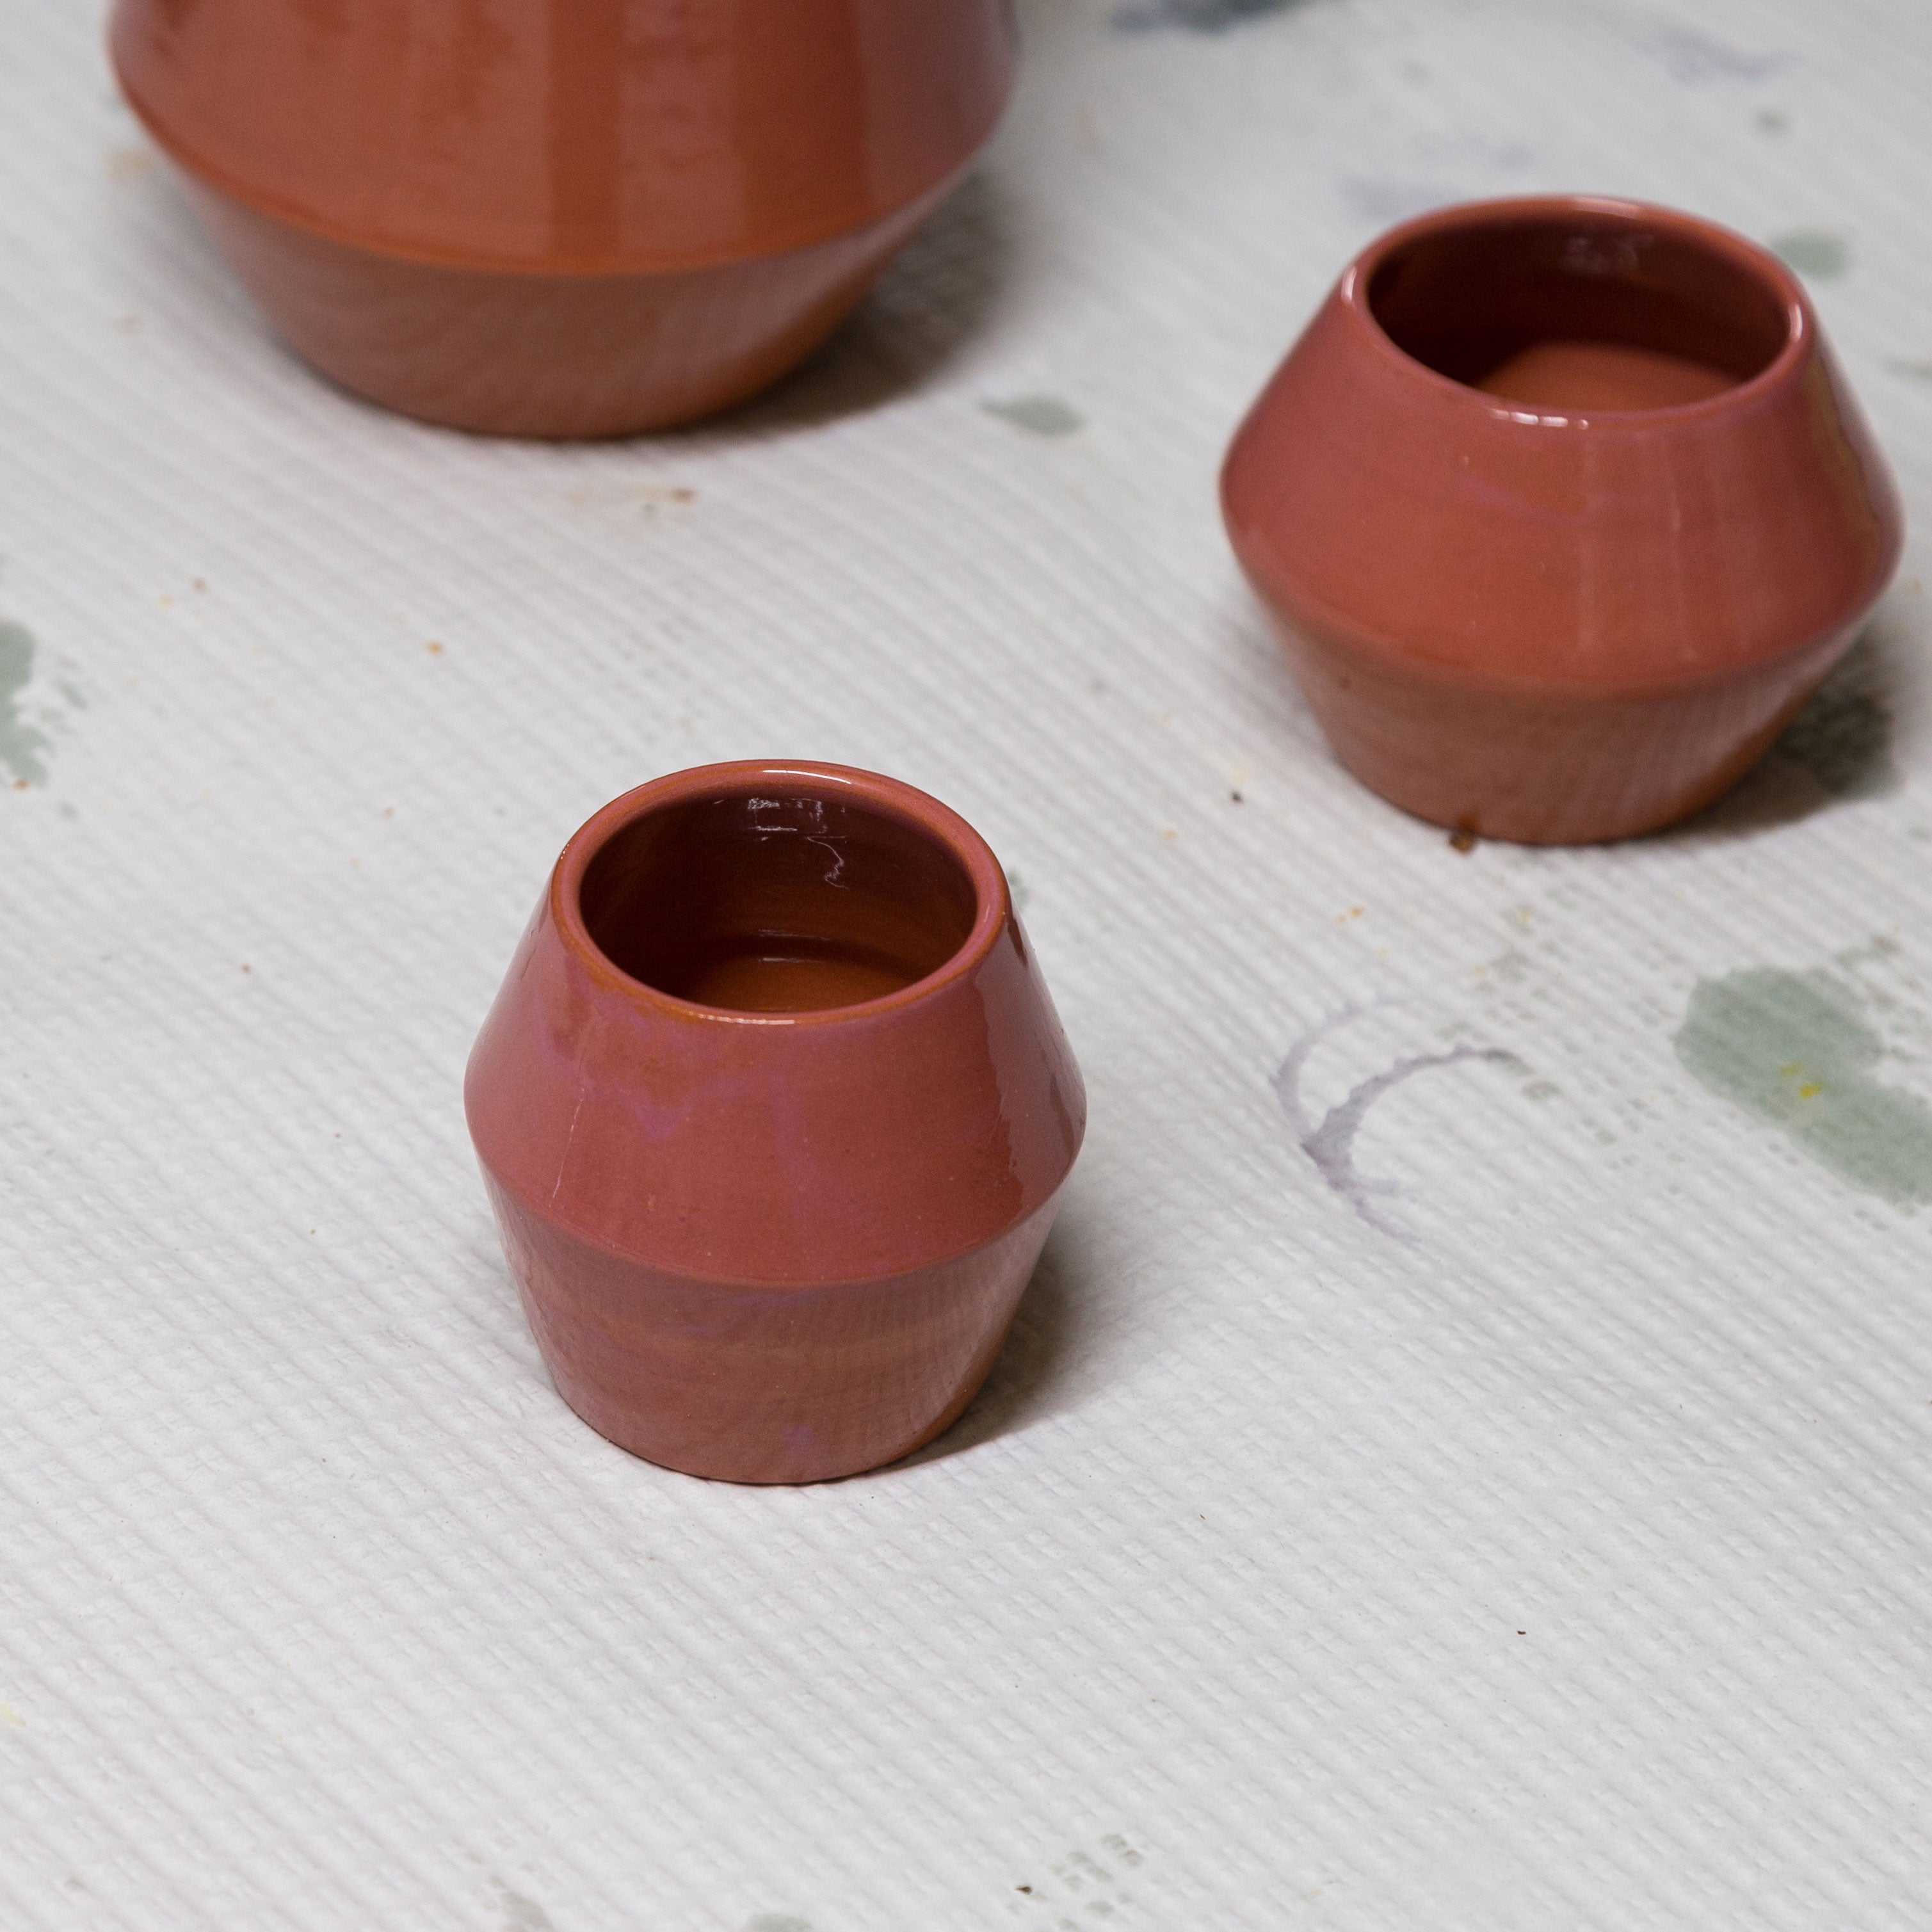 This typical terracotta tumblers used in traditional Portuguese taverns since the most ancient times.